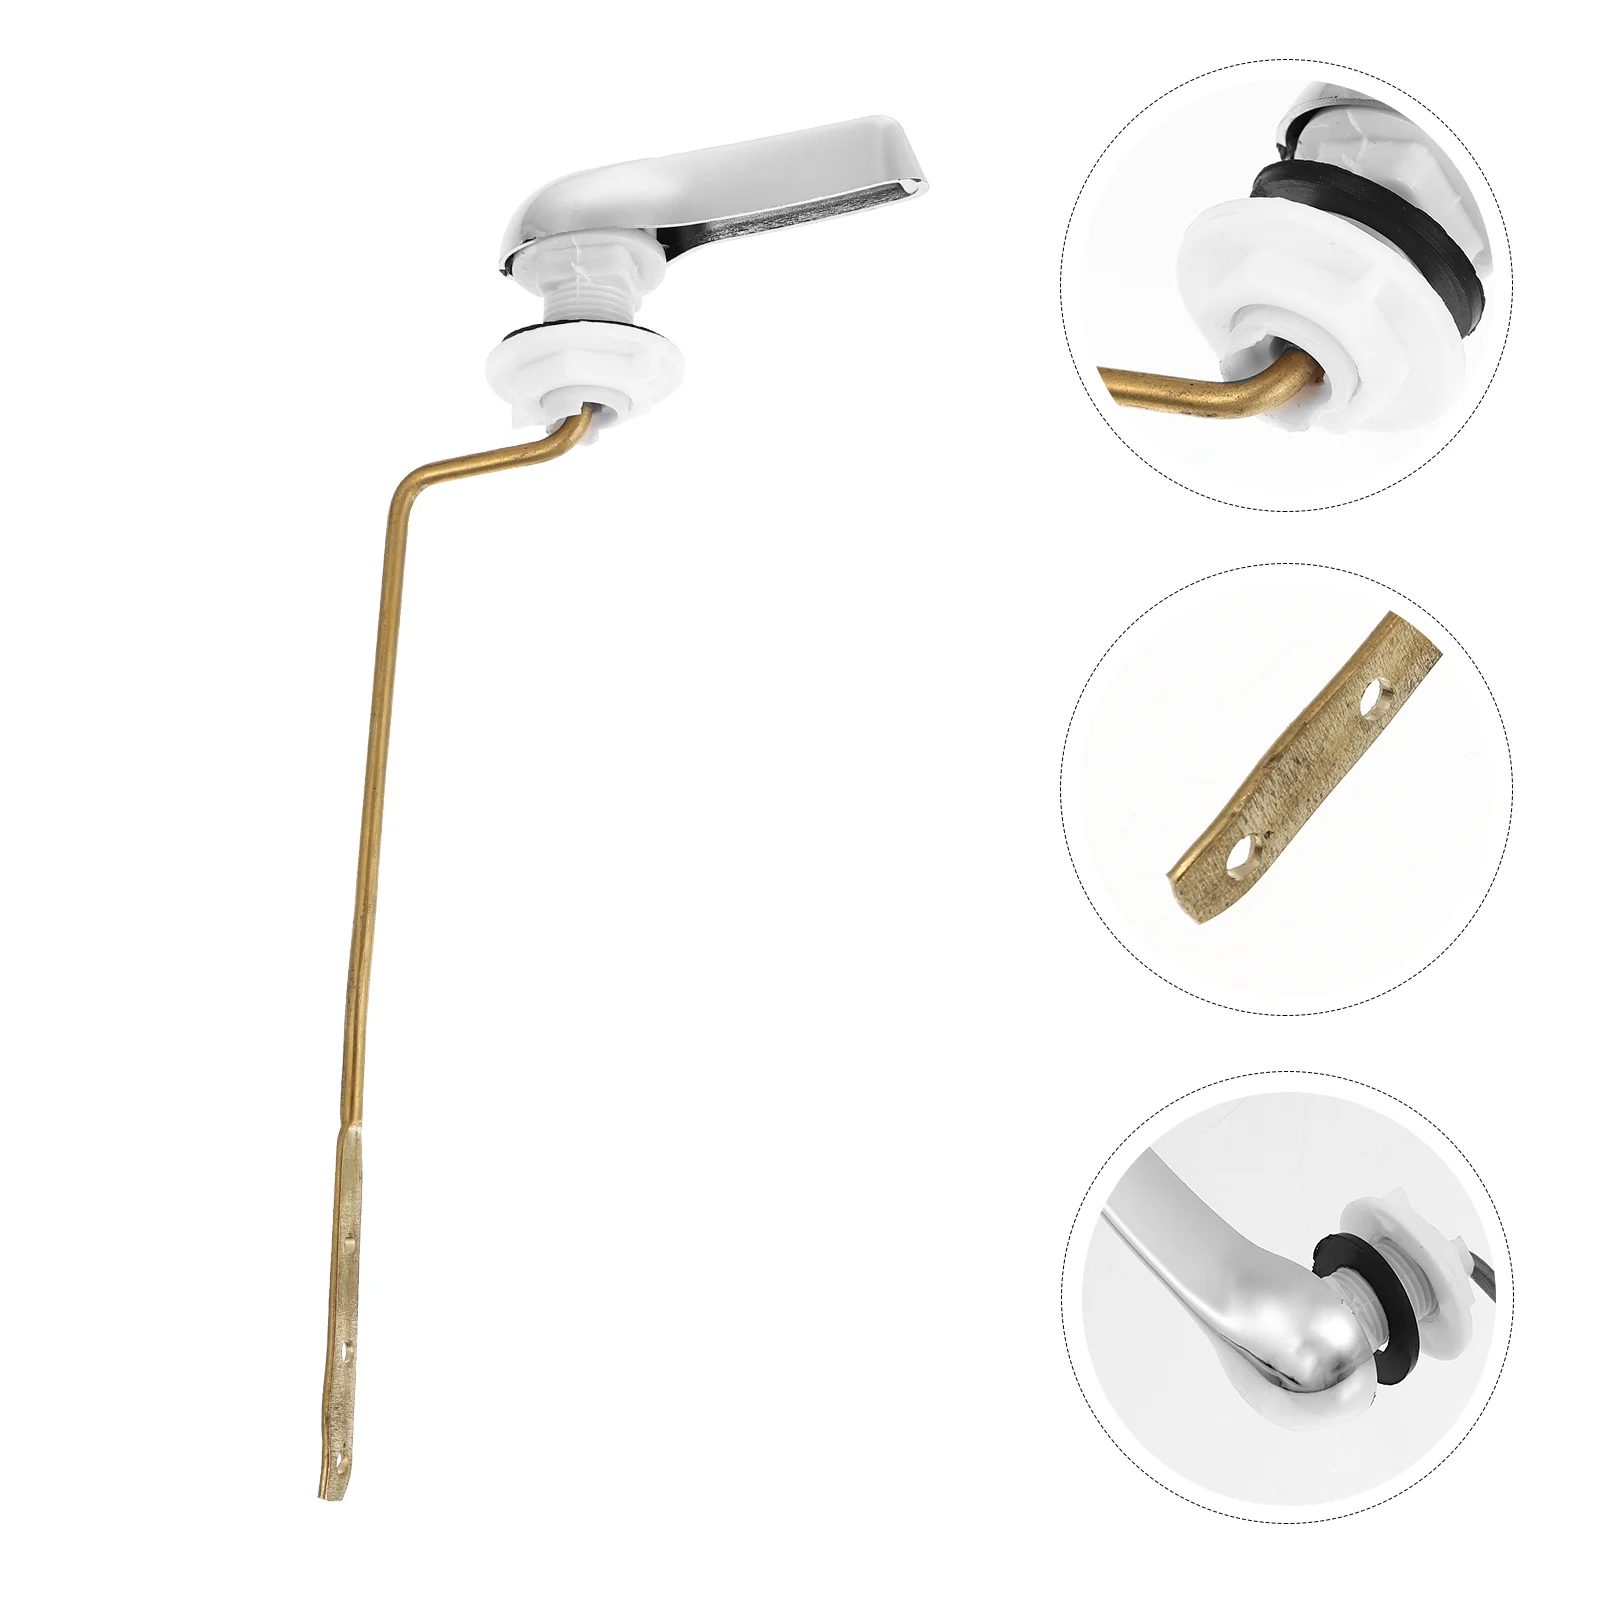 

2 Pcs Wrench Toilet Flush Levers Accessories Metal Buttons Tank Handle Single Push Flushing Abs Travel Accesories